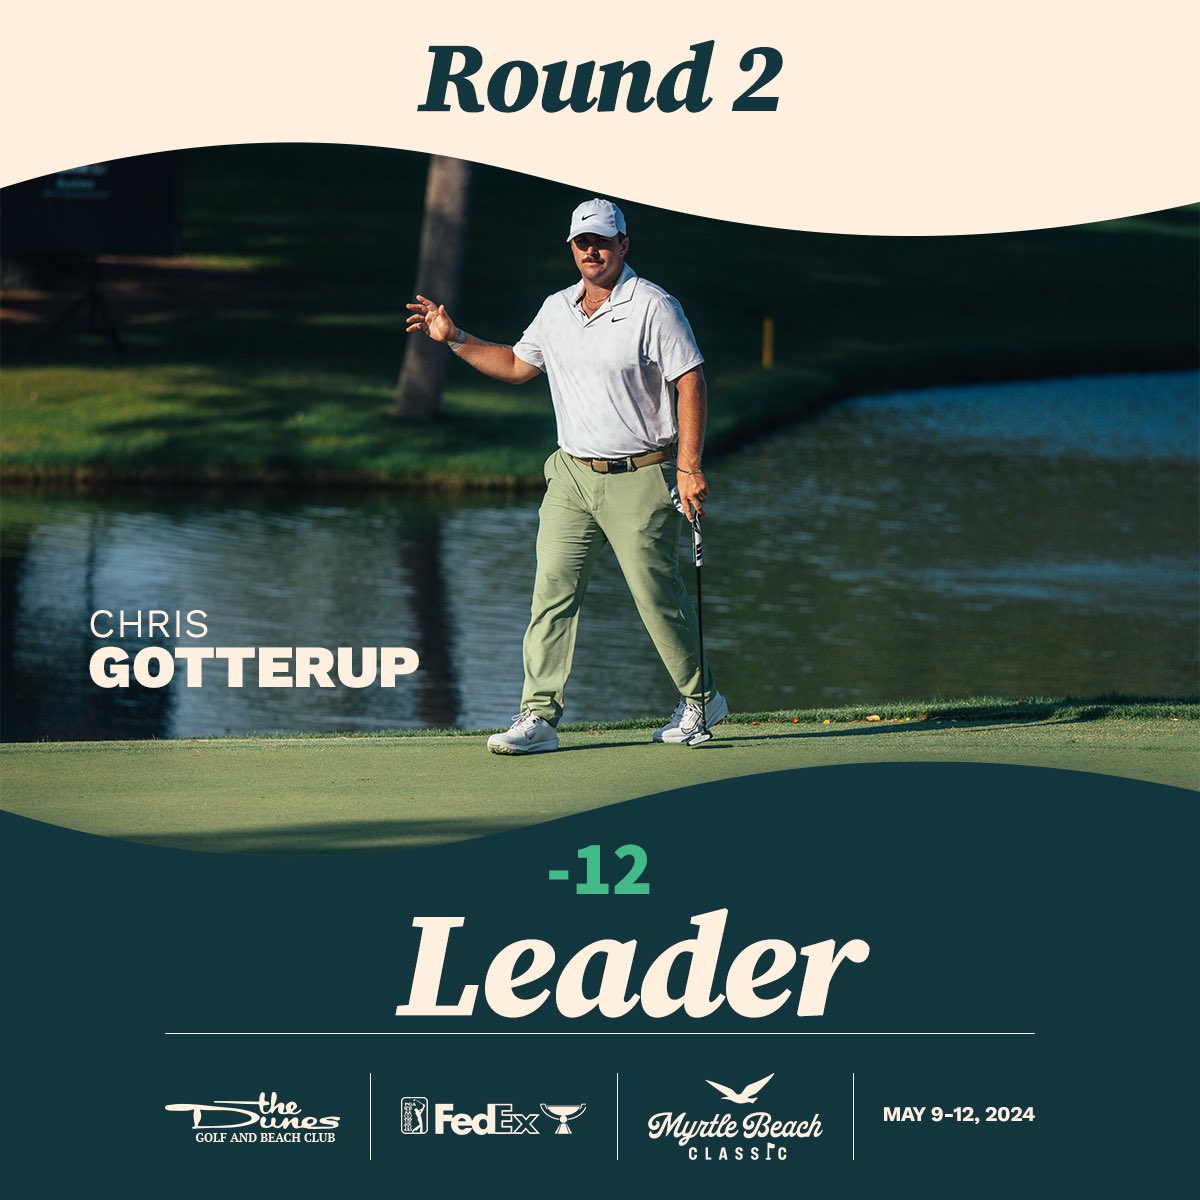 Your leader after 36 holes at the Myrtle Beach Classic, Chris Gotterup.